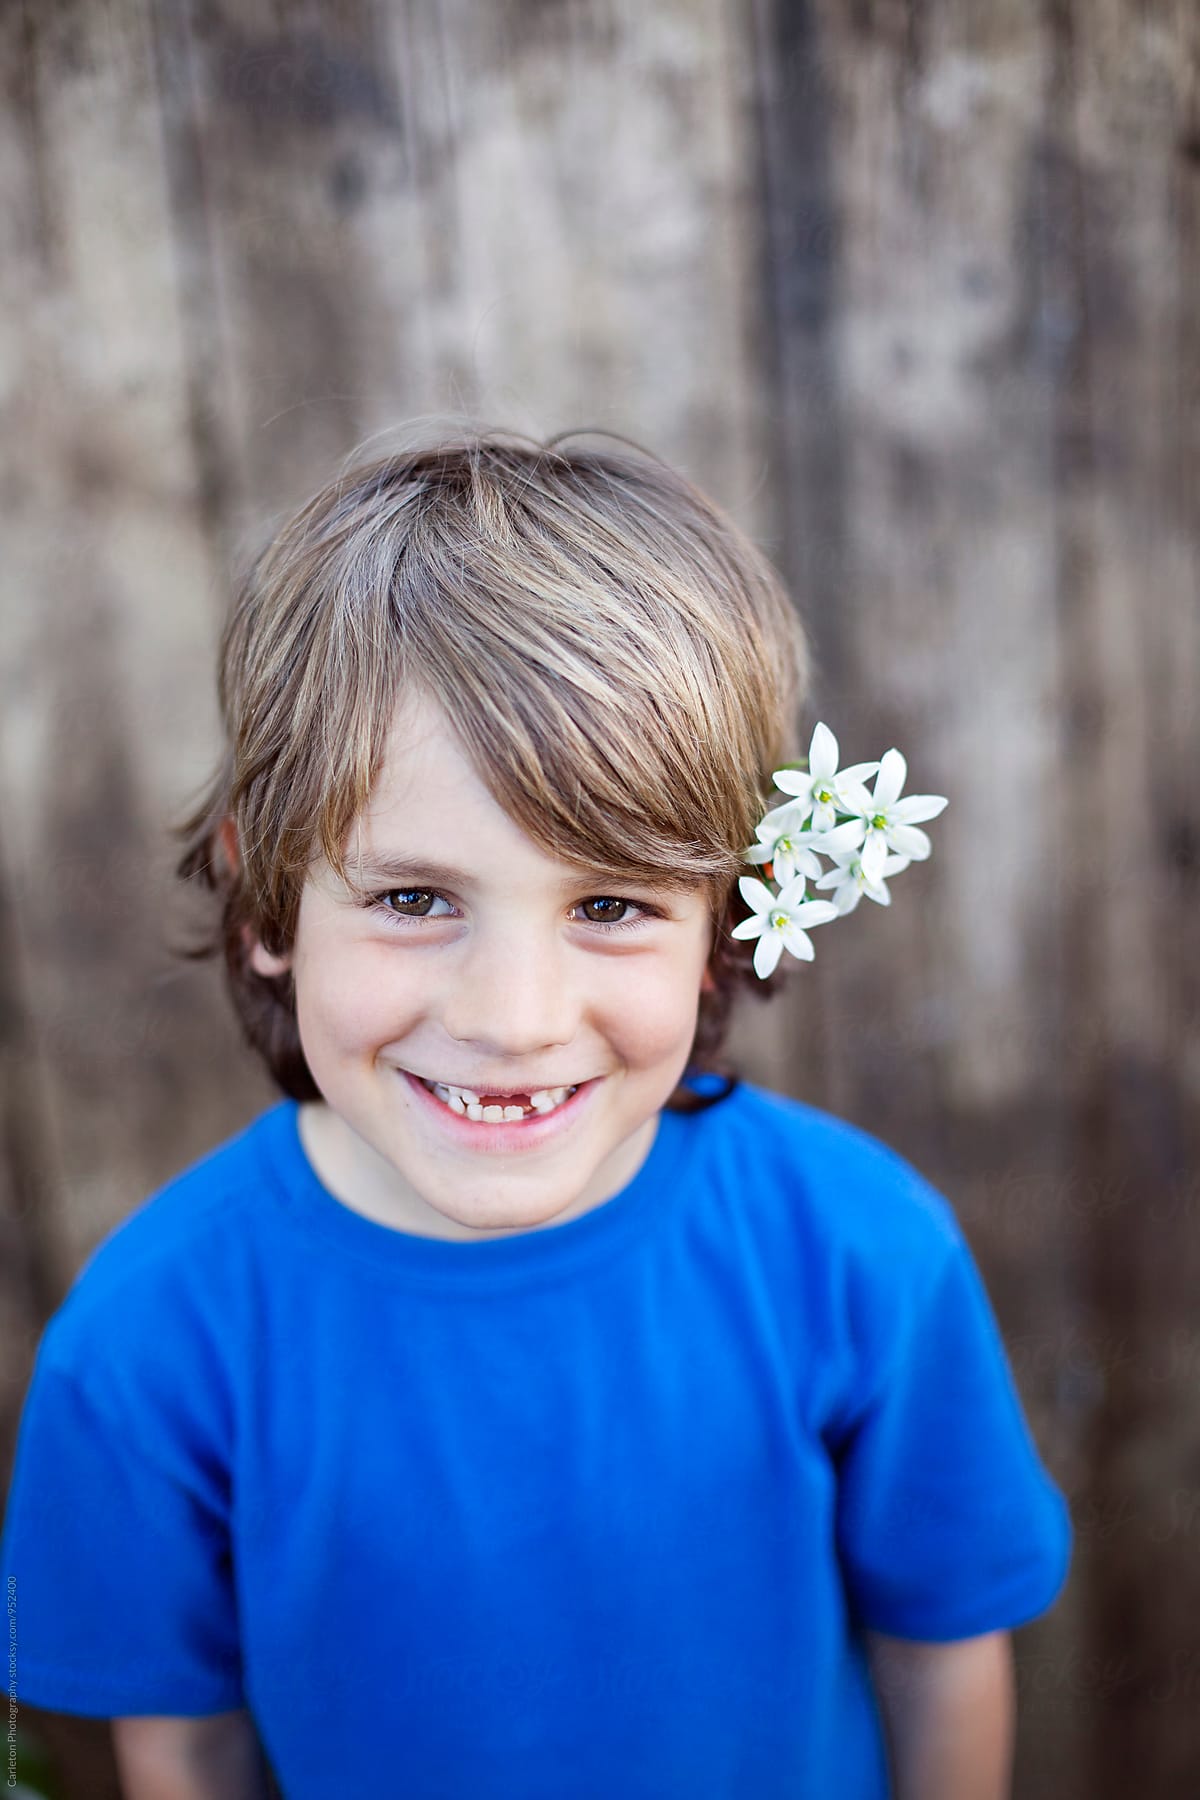 Headshot Of Smiling Seven Year Old Boy With Flowers In His Hair